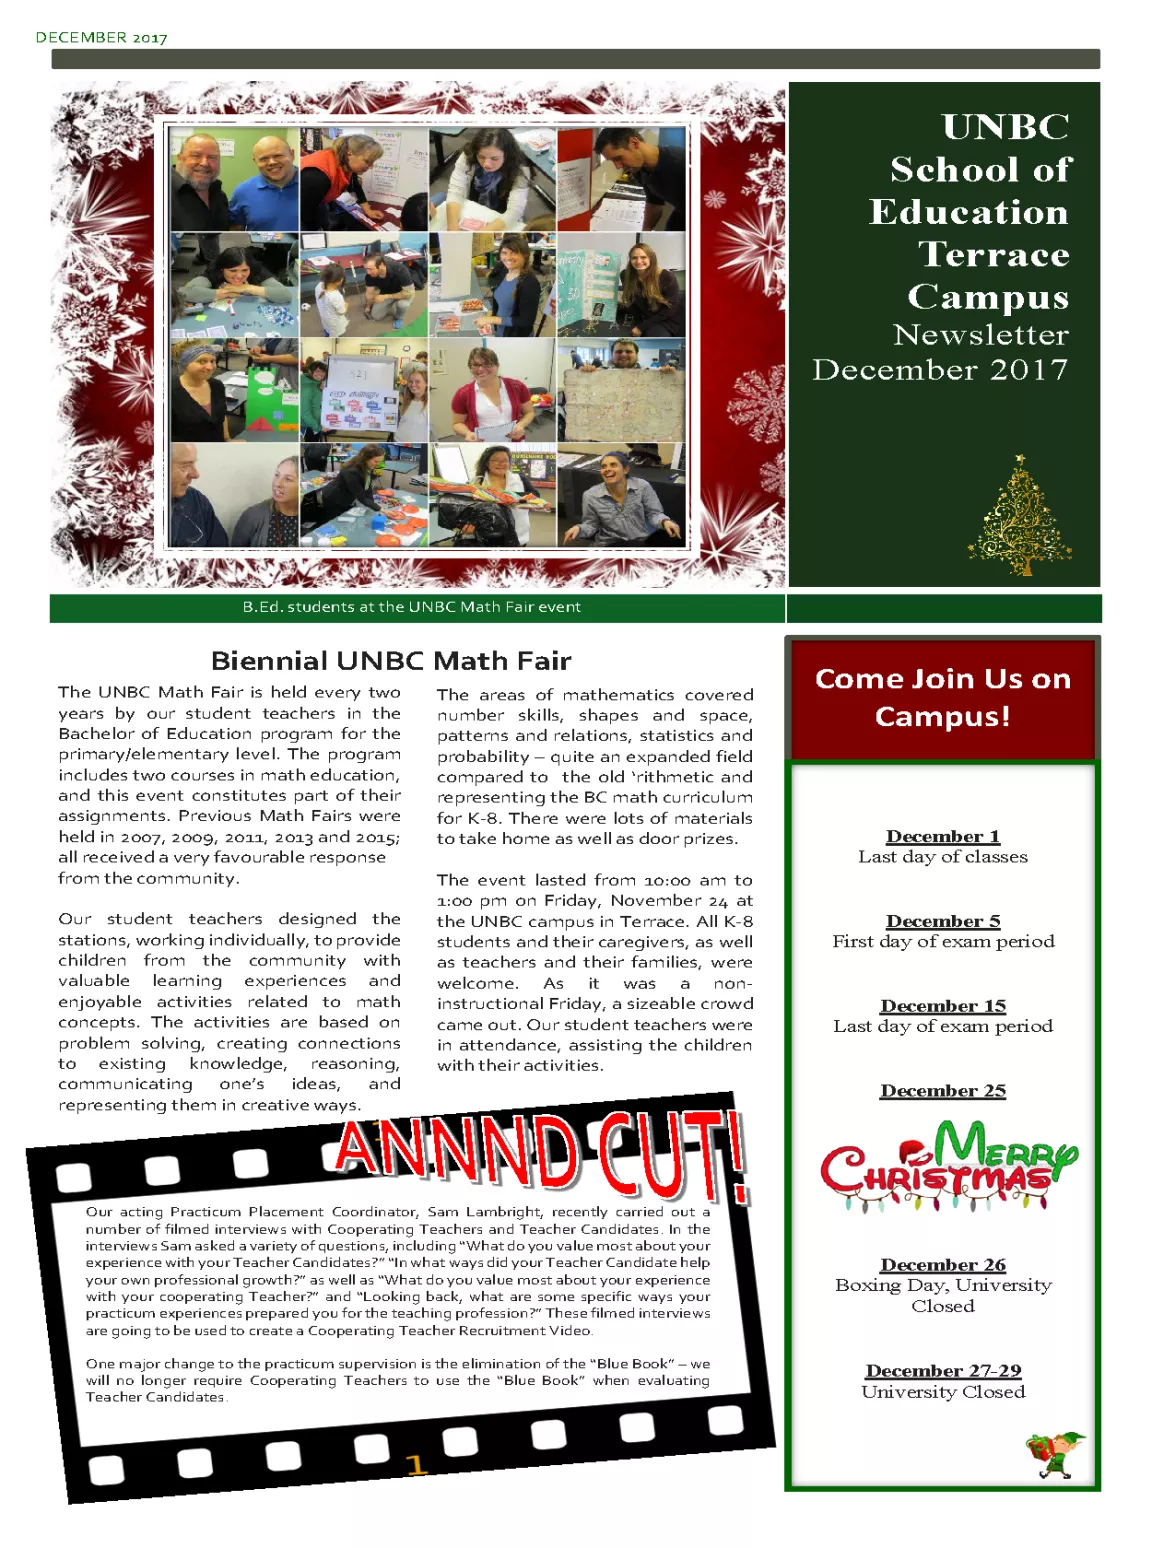 Bachelor of Education December 2017 Newsletter - Page 1/2